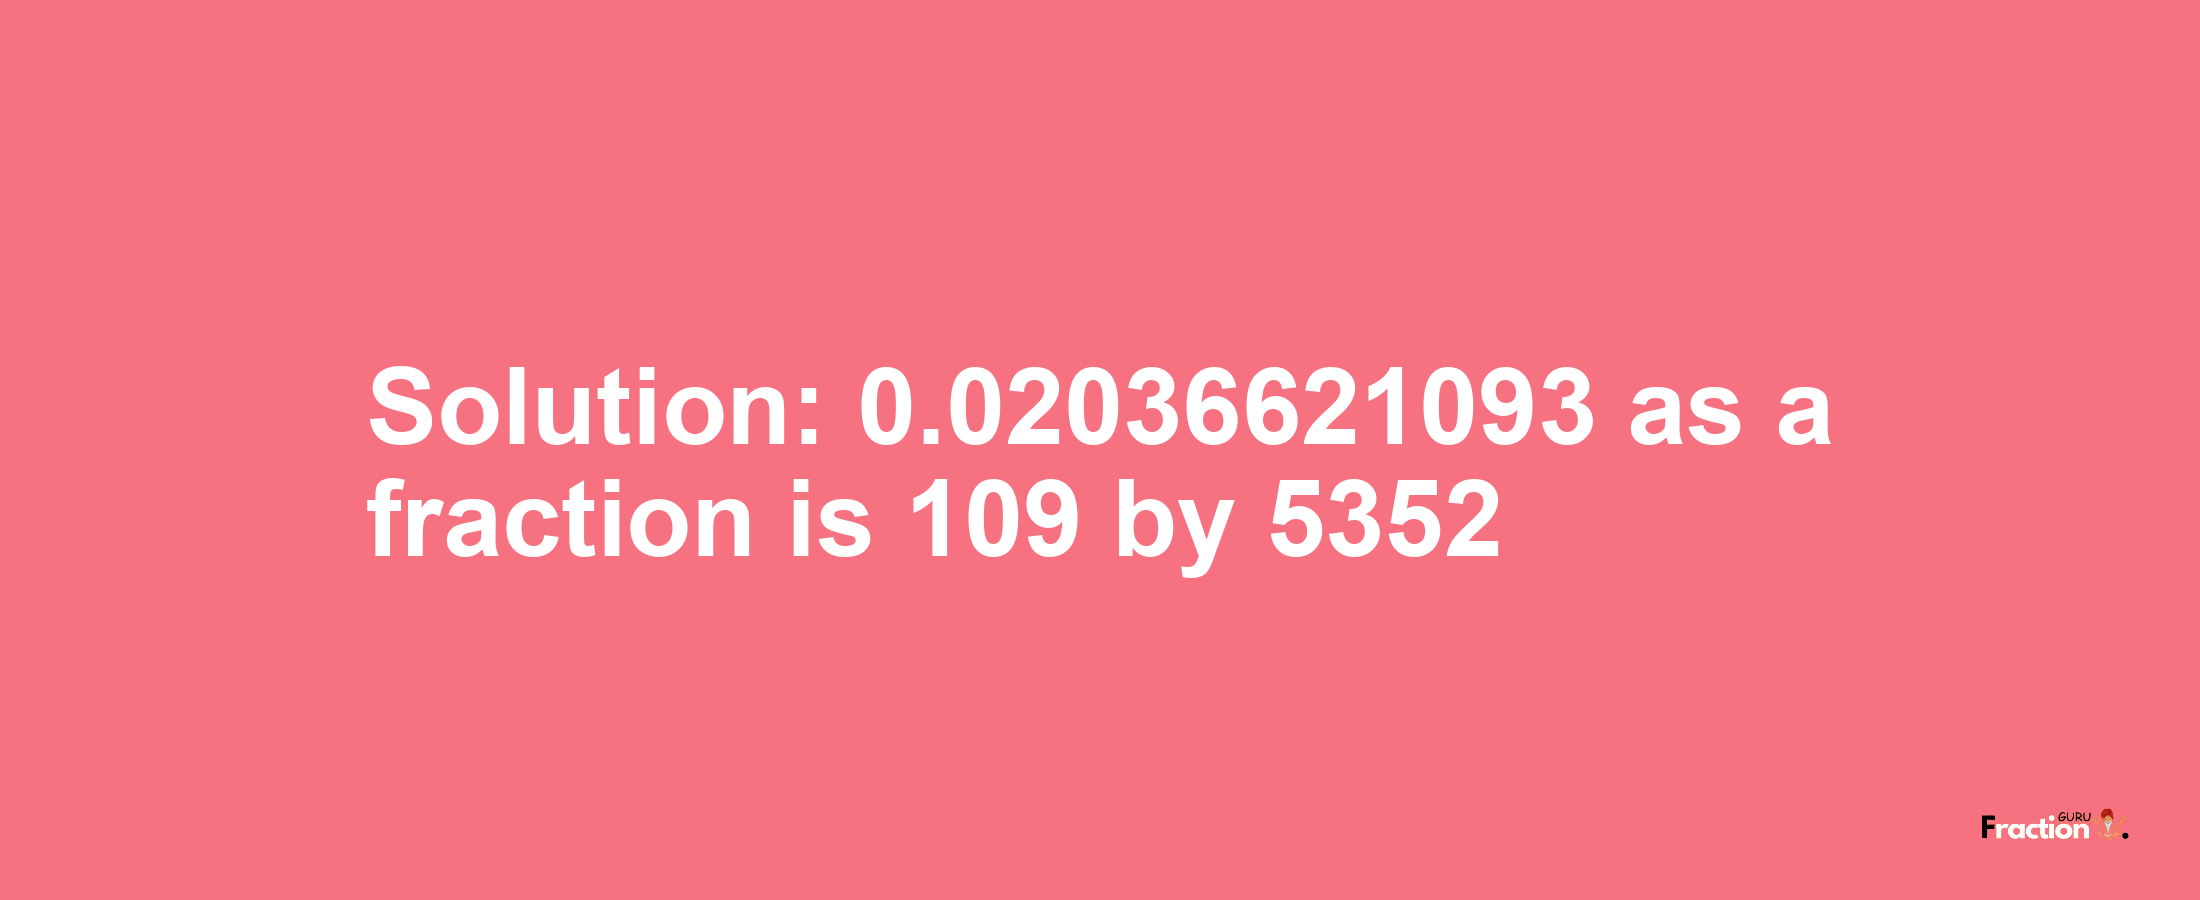 Solution:0.02036621093 as a fraction is 109/5352